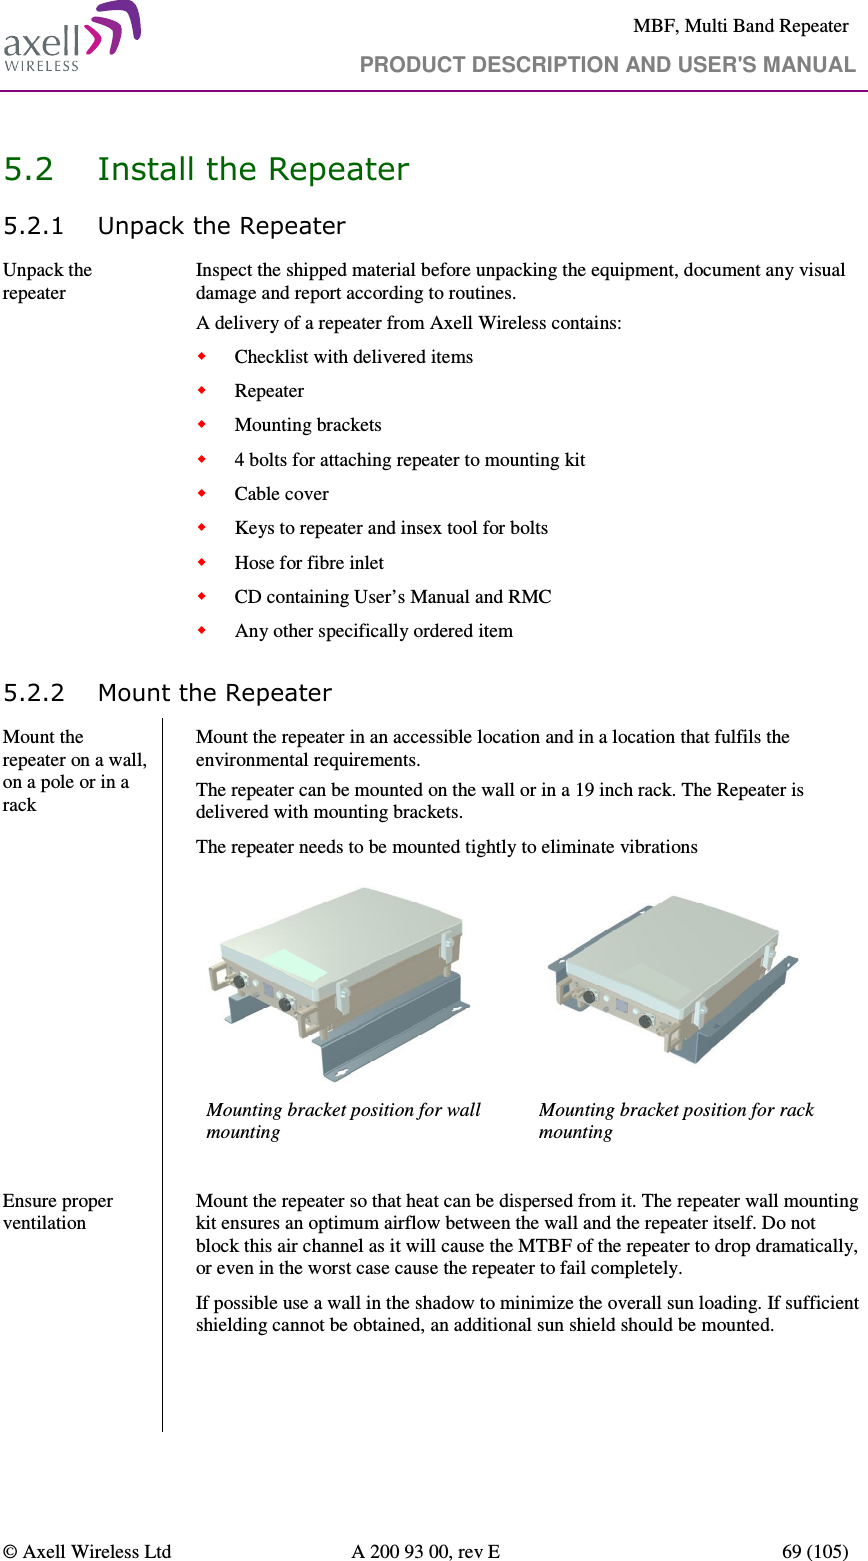     MBF, Multi Band Repeater                                     PRODUCT DESCRIPTION AND USER&apos;S MANUAL   © Axell Wireless Ltd  A 200 93 00, rev E  69 (105)  5.2 Install the Repeater 5.2.1 Unpack the Repeater Unpack the repeater   Inspect the shipped material before unpacking the equipment, document any visual damage and report according to routines. A delivery of a repeater from Axell Wireless contains:  Checklist with delivered items  Repeater  Mounting brackets  4 bolts for attaching repeater to mounting kit  Cable cover  Keys to repeater and insex tool for bolts  Hose for fibre inlet  CD containing User’s Manual and RMC  Any other specifically ordered item 5.2.2 Mount the Repeater  Mount the repeater on a wall, on a pole or in a rack           Mount the repeater in an accessible location and in a location that fulfils the environmental requirements.  The repeater can be mounted on the wall or in a 19 inch rack. The Repeater is delivered with mounting brackets.  The repeater needs to be mounted tightly to eliminate vibrations   Mounting bracket position for wall mounting Mounting bracket position for rack mounting     Ensure proper ventilation    Mount the repeater so that heat can be dispersed from it. The repeater wall mounting kit ensures an optimum airflow between the wall and the repeater itself. Do not block this air channel as it will cause the MTBF of the repeater to drop dramatically, or even in the worst case cause the repeater to fail completely.  If possible use a wall in the shadow to minimize the overall sun loading. If sufficient shielding cannot be obtained, an additional sun shield should be mounted.  